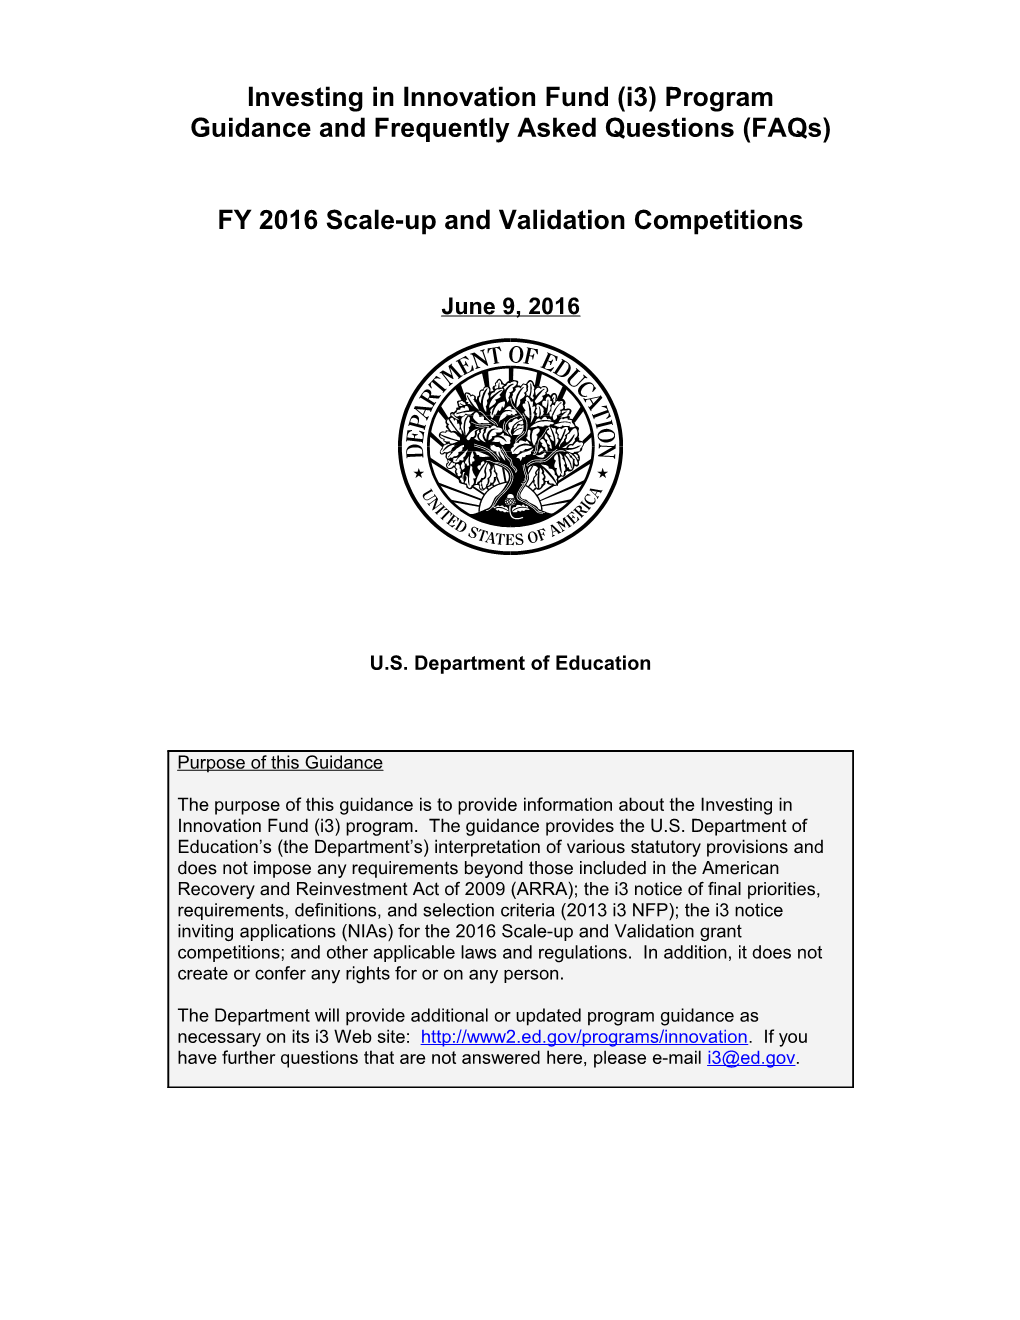 FY 2016 Scale-Up and Validation Competitions (MS Word)